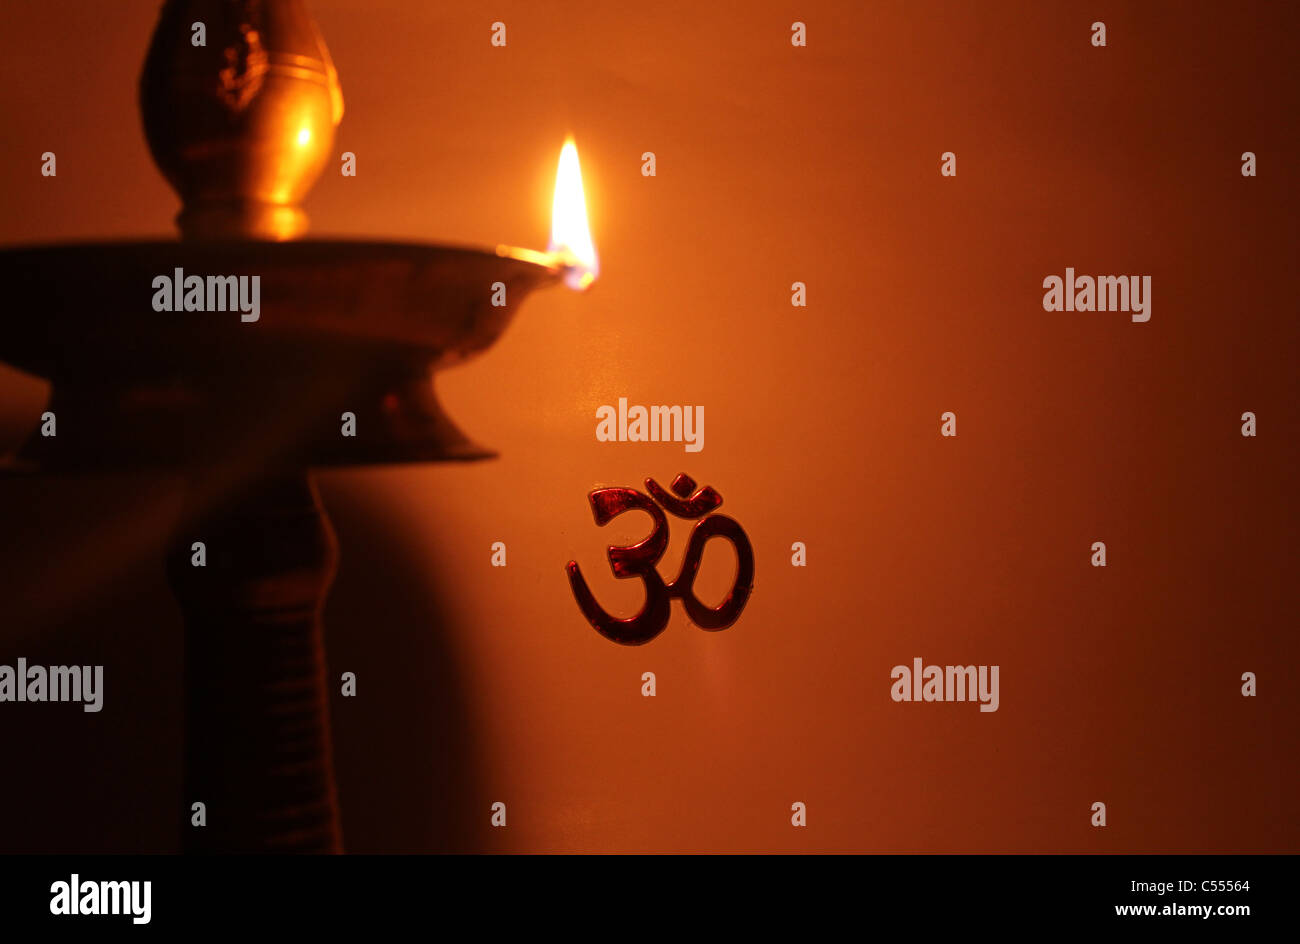 Hindu symbol 'om' or 'AUM' lit up by a traditional Indian lamp Stock Photo